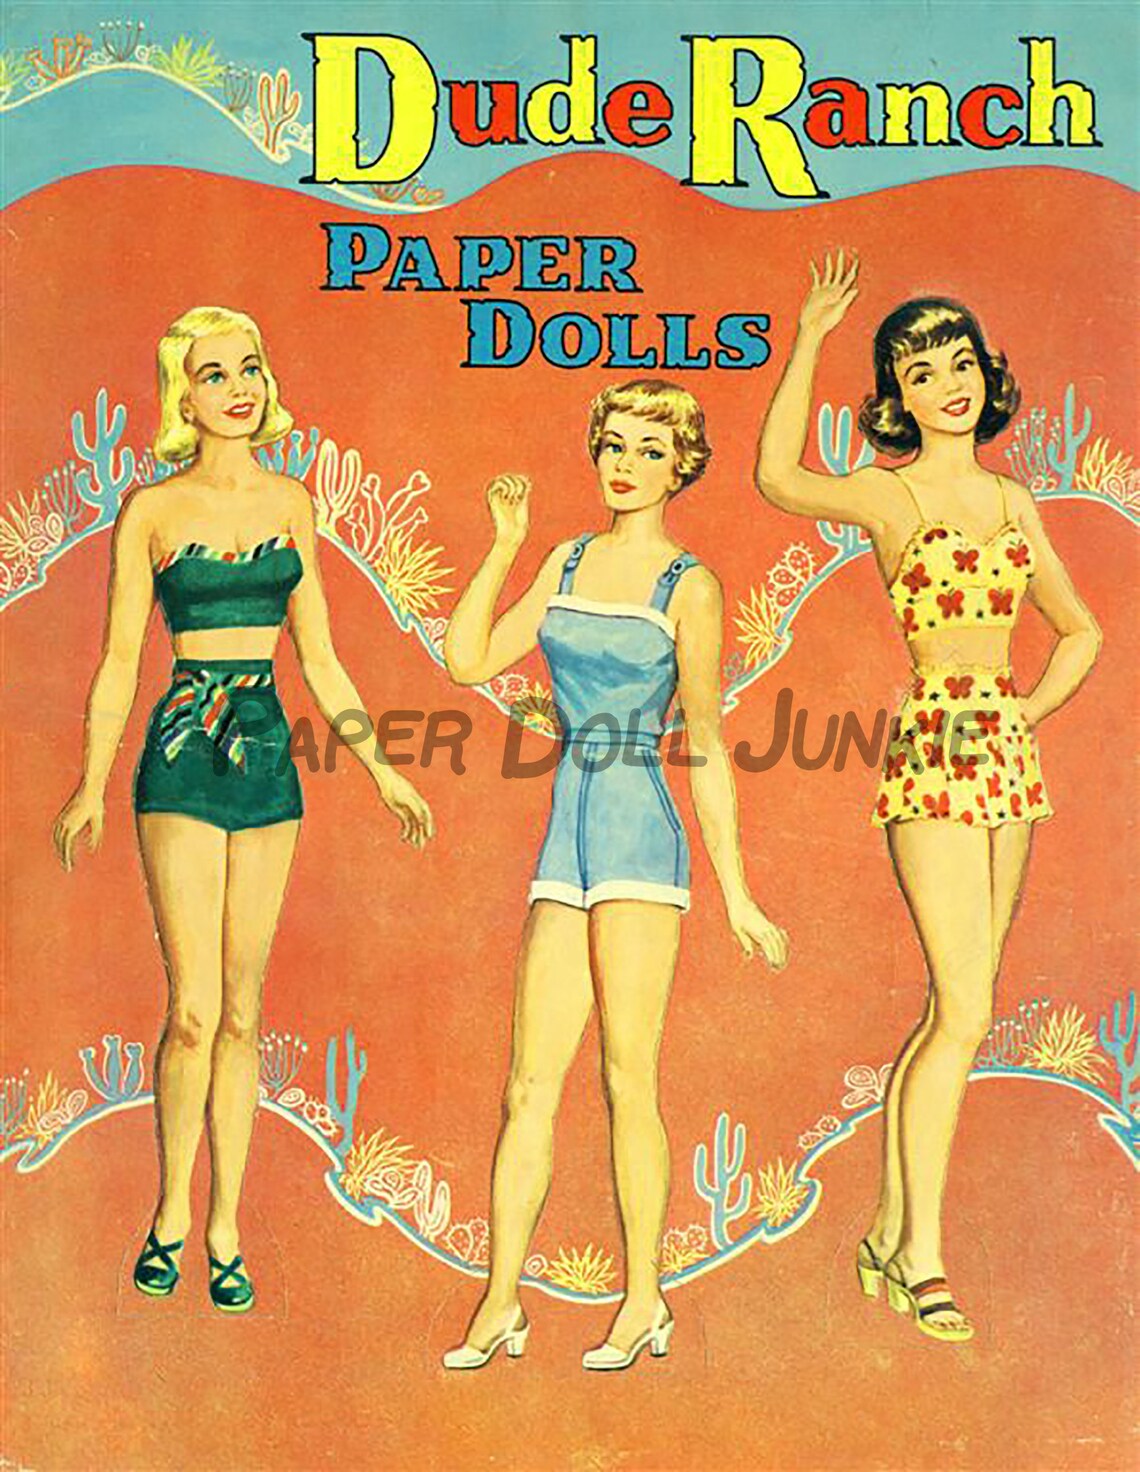 1950 Paper Dolls Dude Ranch Western Paper Dolls (Download Now) - Etsy